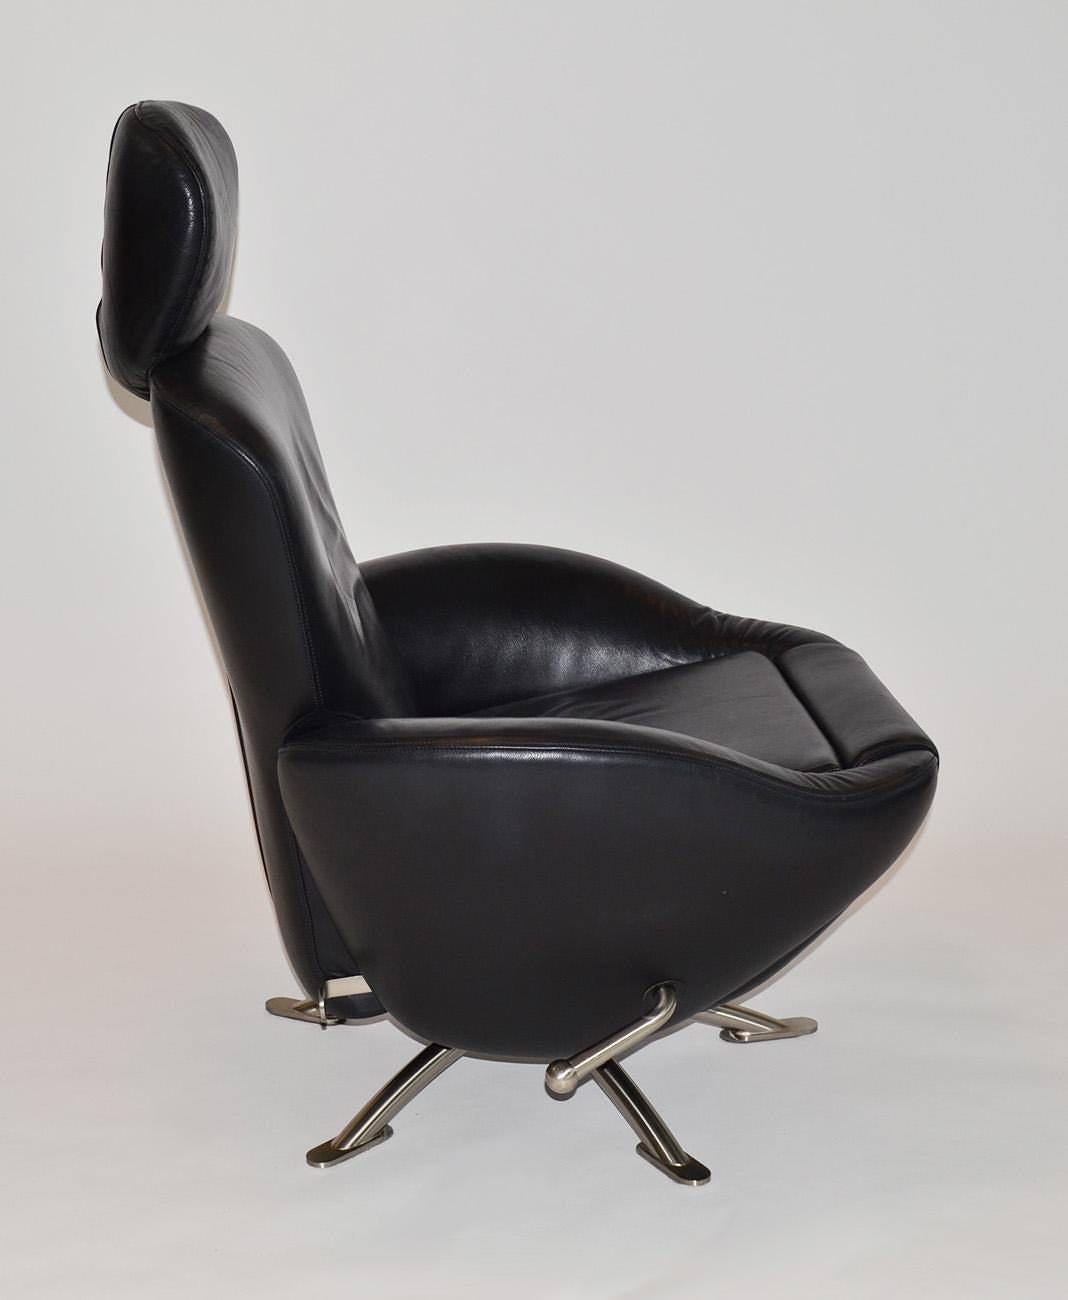 Modern Cassina Dodo Black Leather Recliner Armchair Lounge Italy 2000s